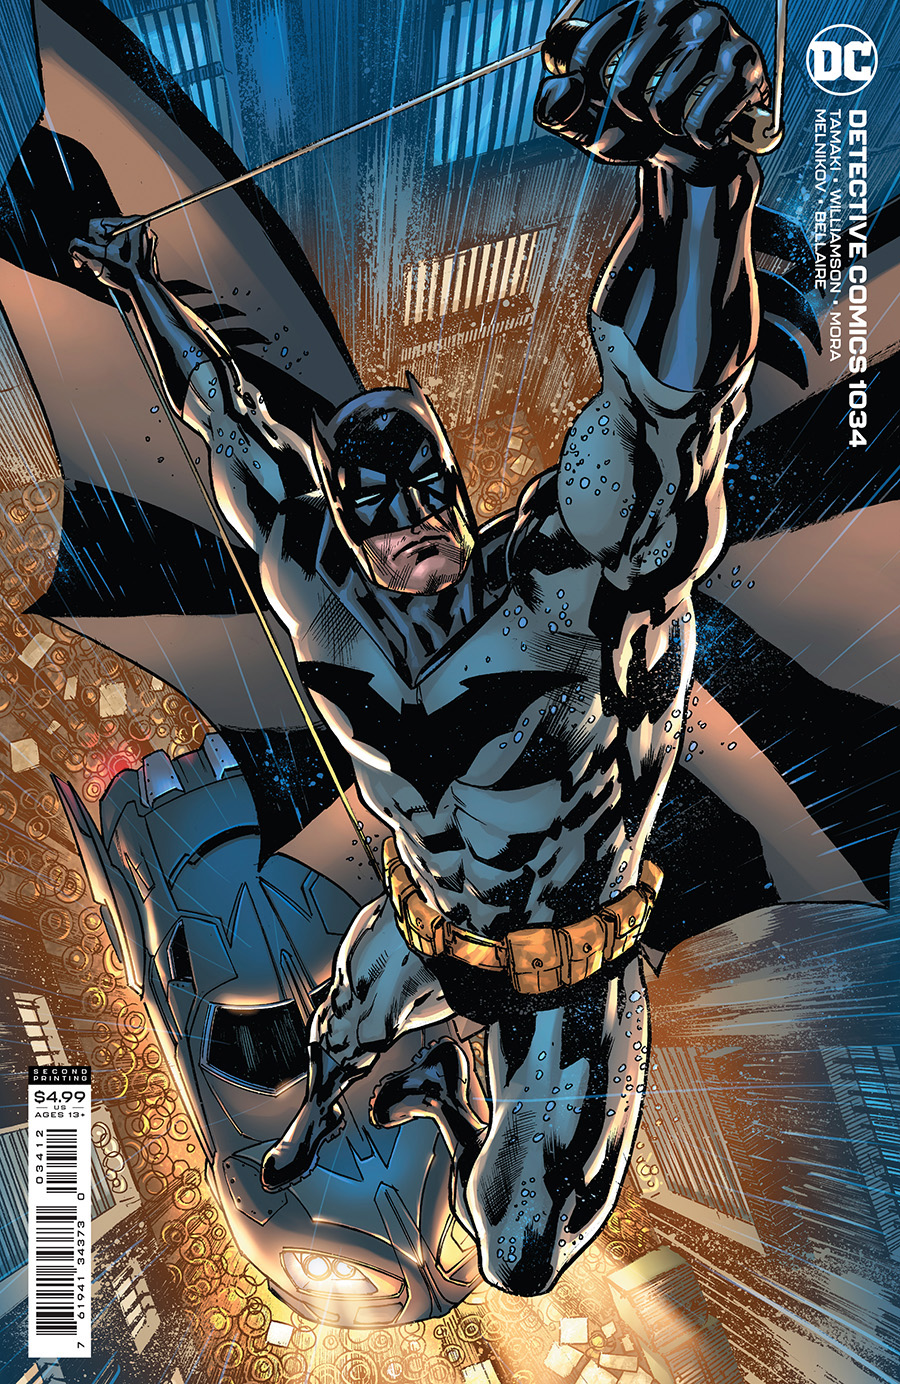 Detective Comics Vol 2 #1034 Cover E 2nd Ptg Bryan Hitch Variant Cover